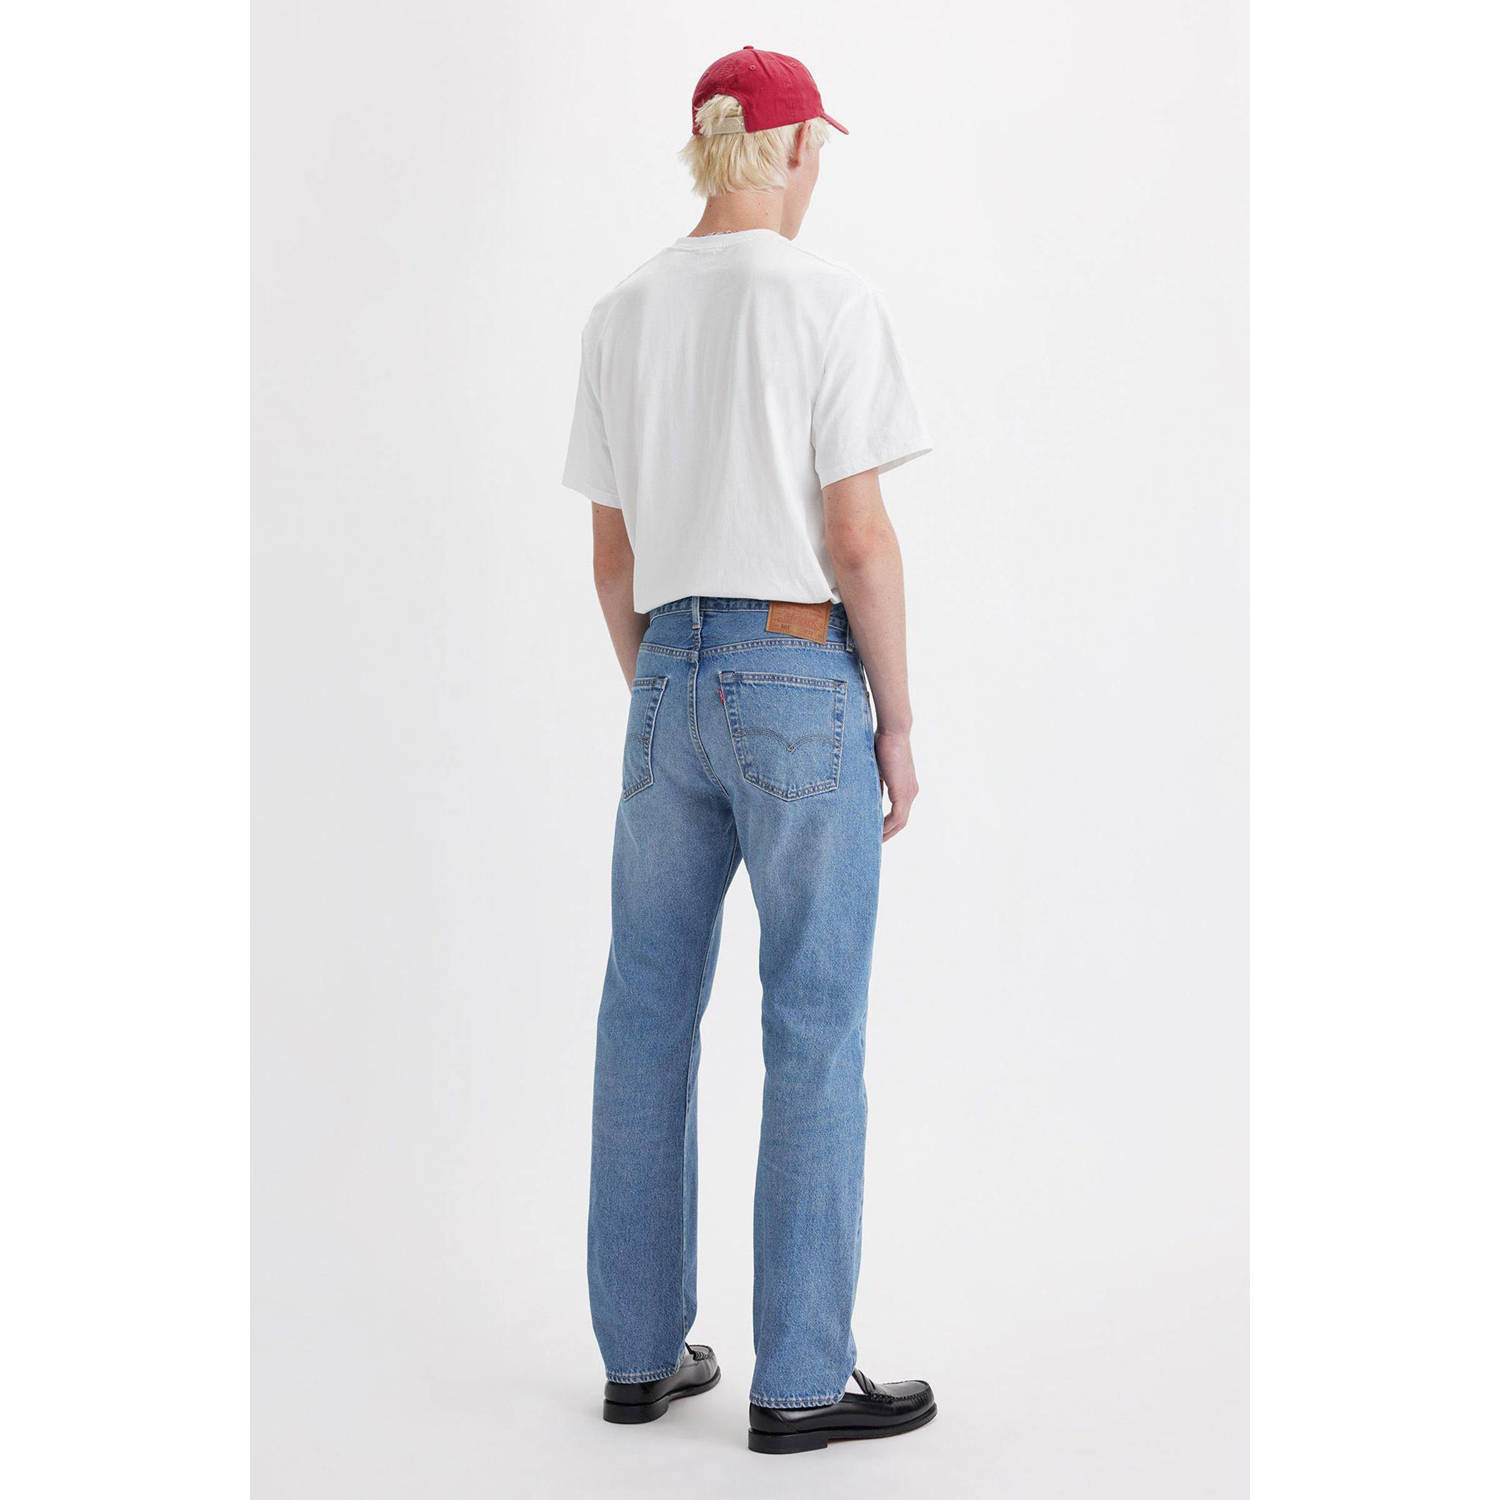 Levi's 501 straight fit jeans chemicals